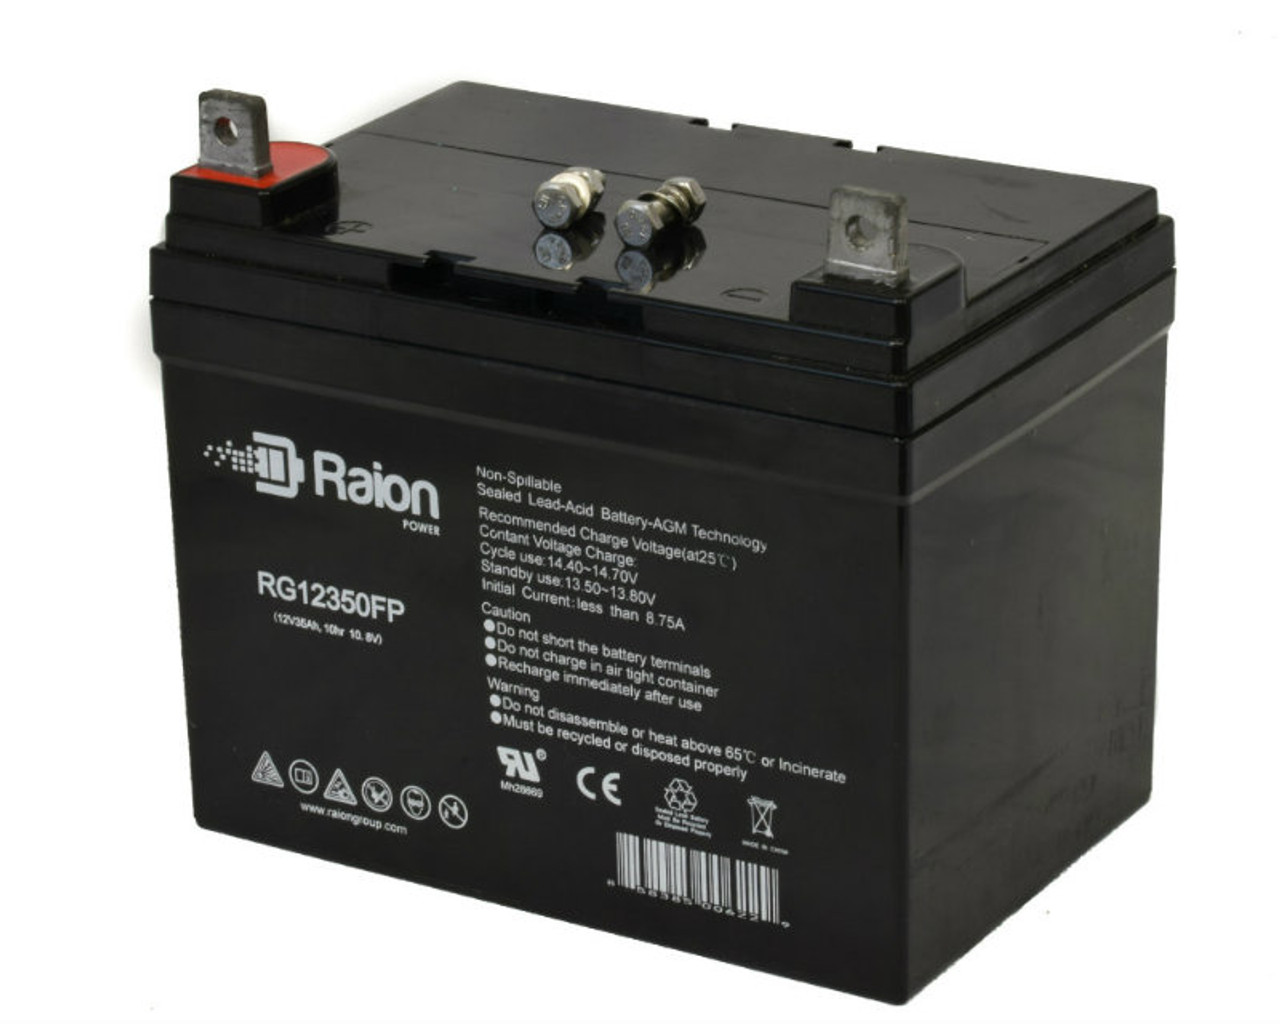 Raion Power Replacement 12V 35Ah Battery for Tru-Test 2-832E5 - 1 Pack